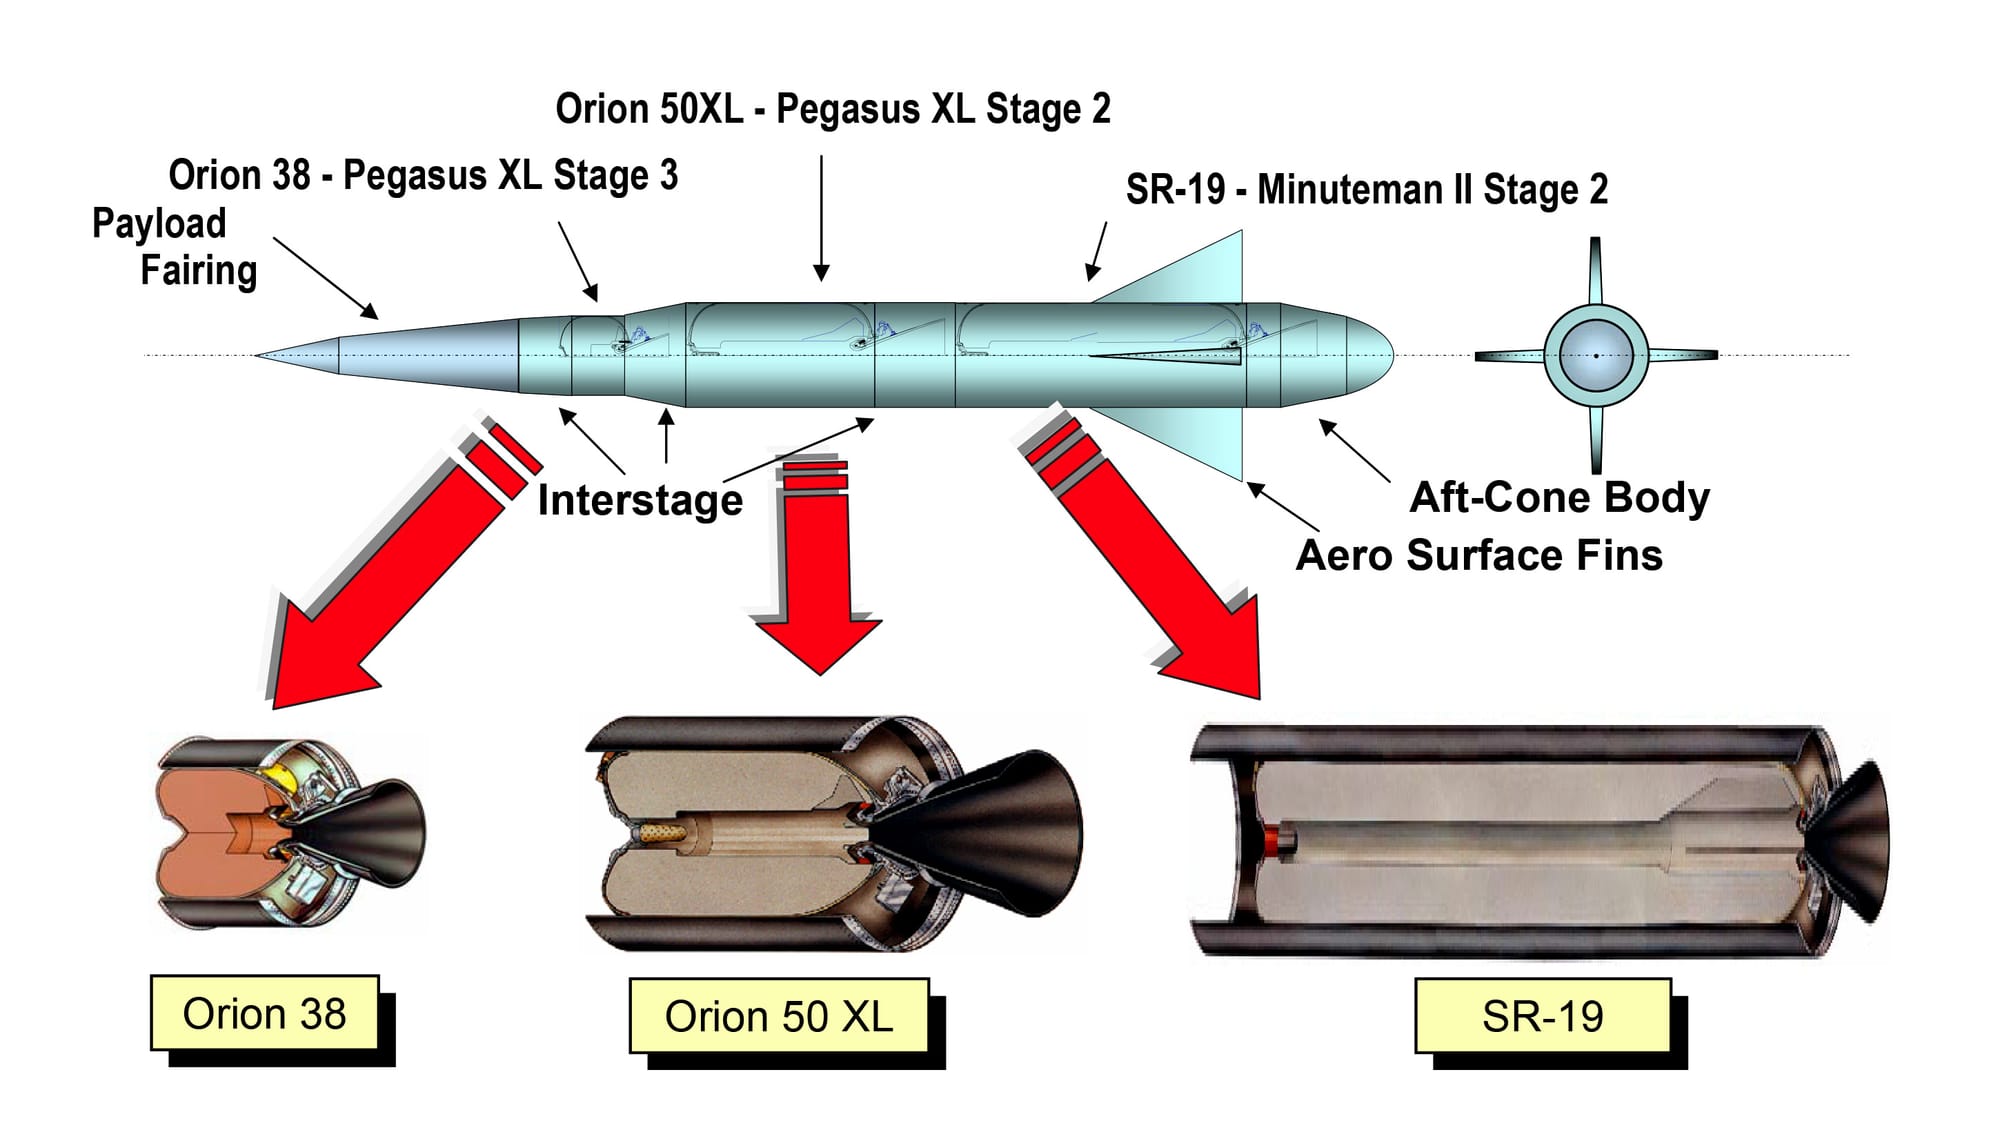 The major components of the F-15 Global Strike Eagle launch vehicle.